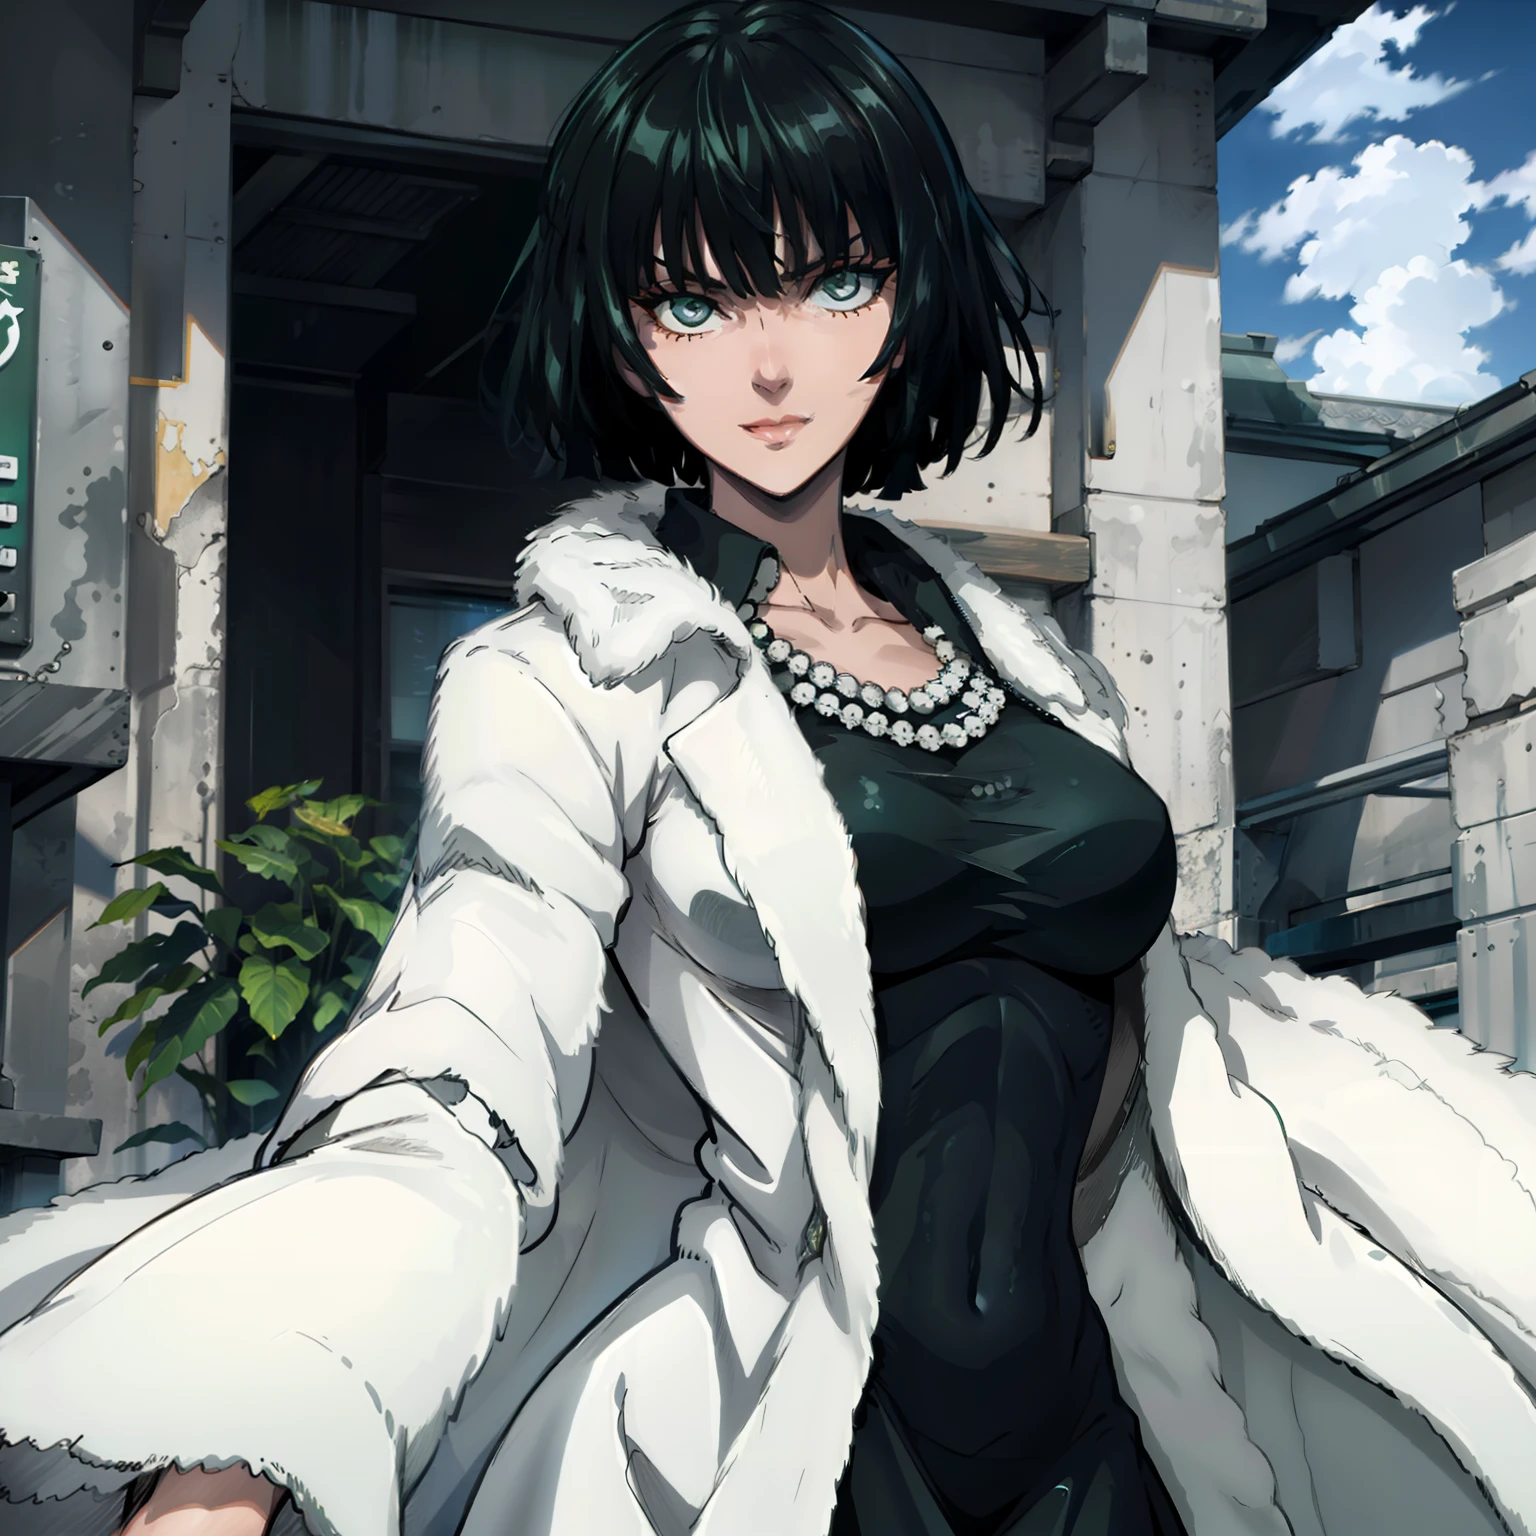 female with green fringe style bob haircut, wearing white fur lined robe, wearing v-neck black dress with high collar, wearing pearl necklaces, dominant pose, seductive smile, alone, solo, alone, (SOLO)(ALONE)